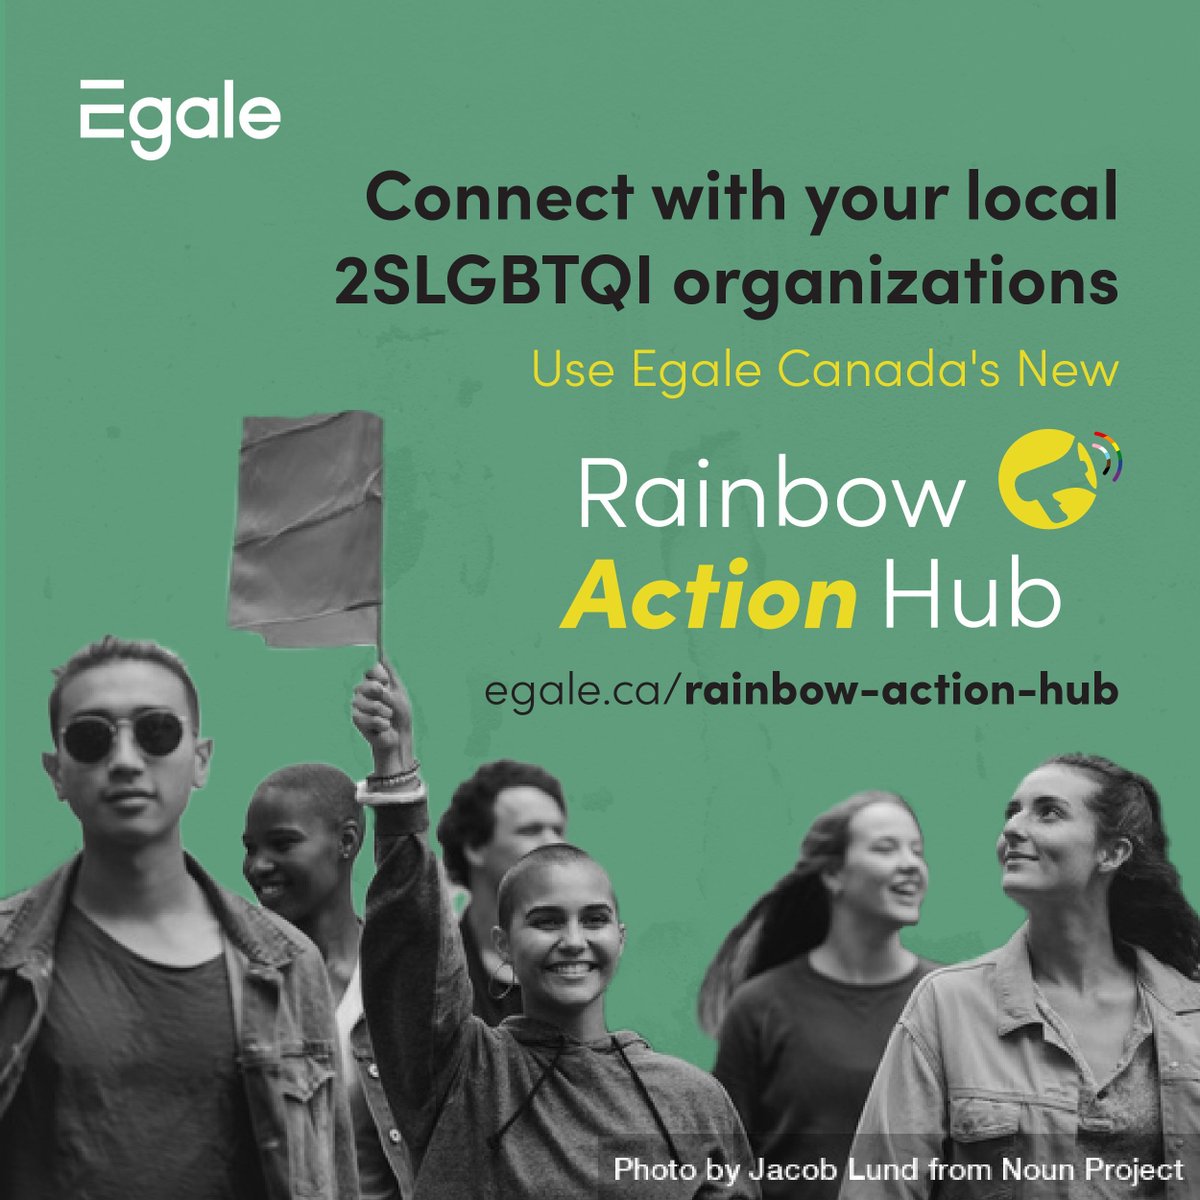 Find and connect with your local 2SLGBTQI organizations. The Rainbow Access Hub includes a map of local organizations near you for collaboration to combat anti-2SLGBTQI hate. Learn more at egale.ca/rainbow-action…